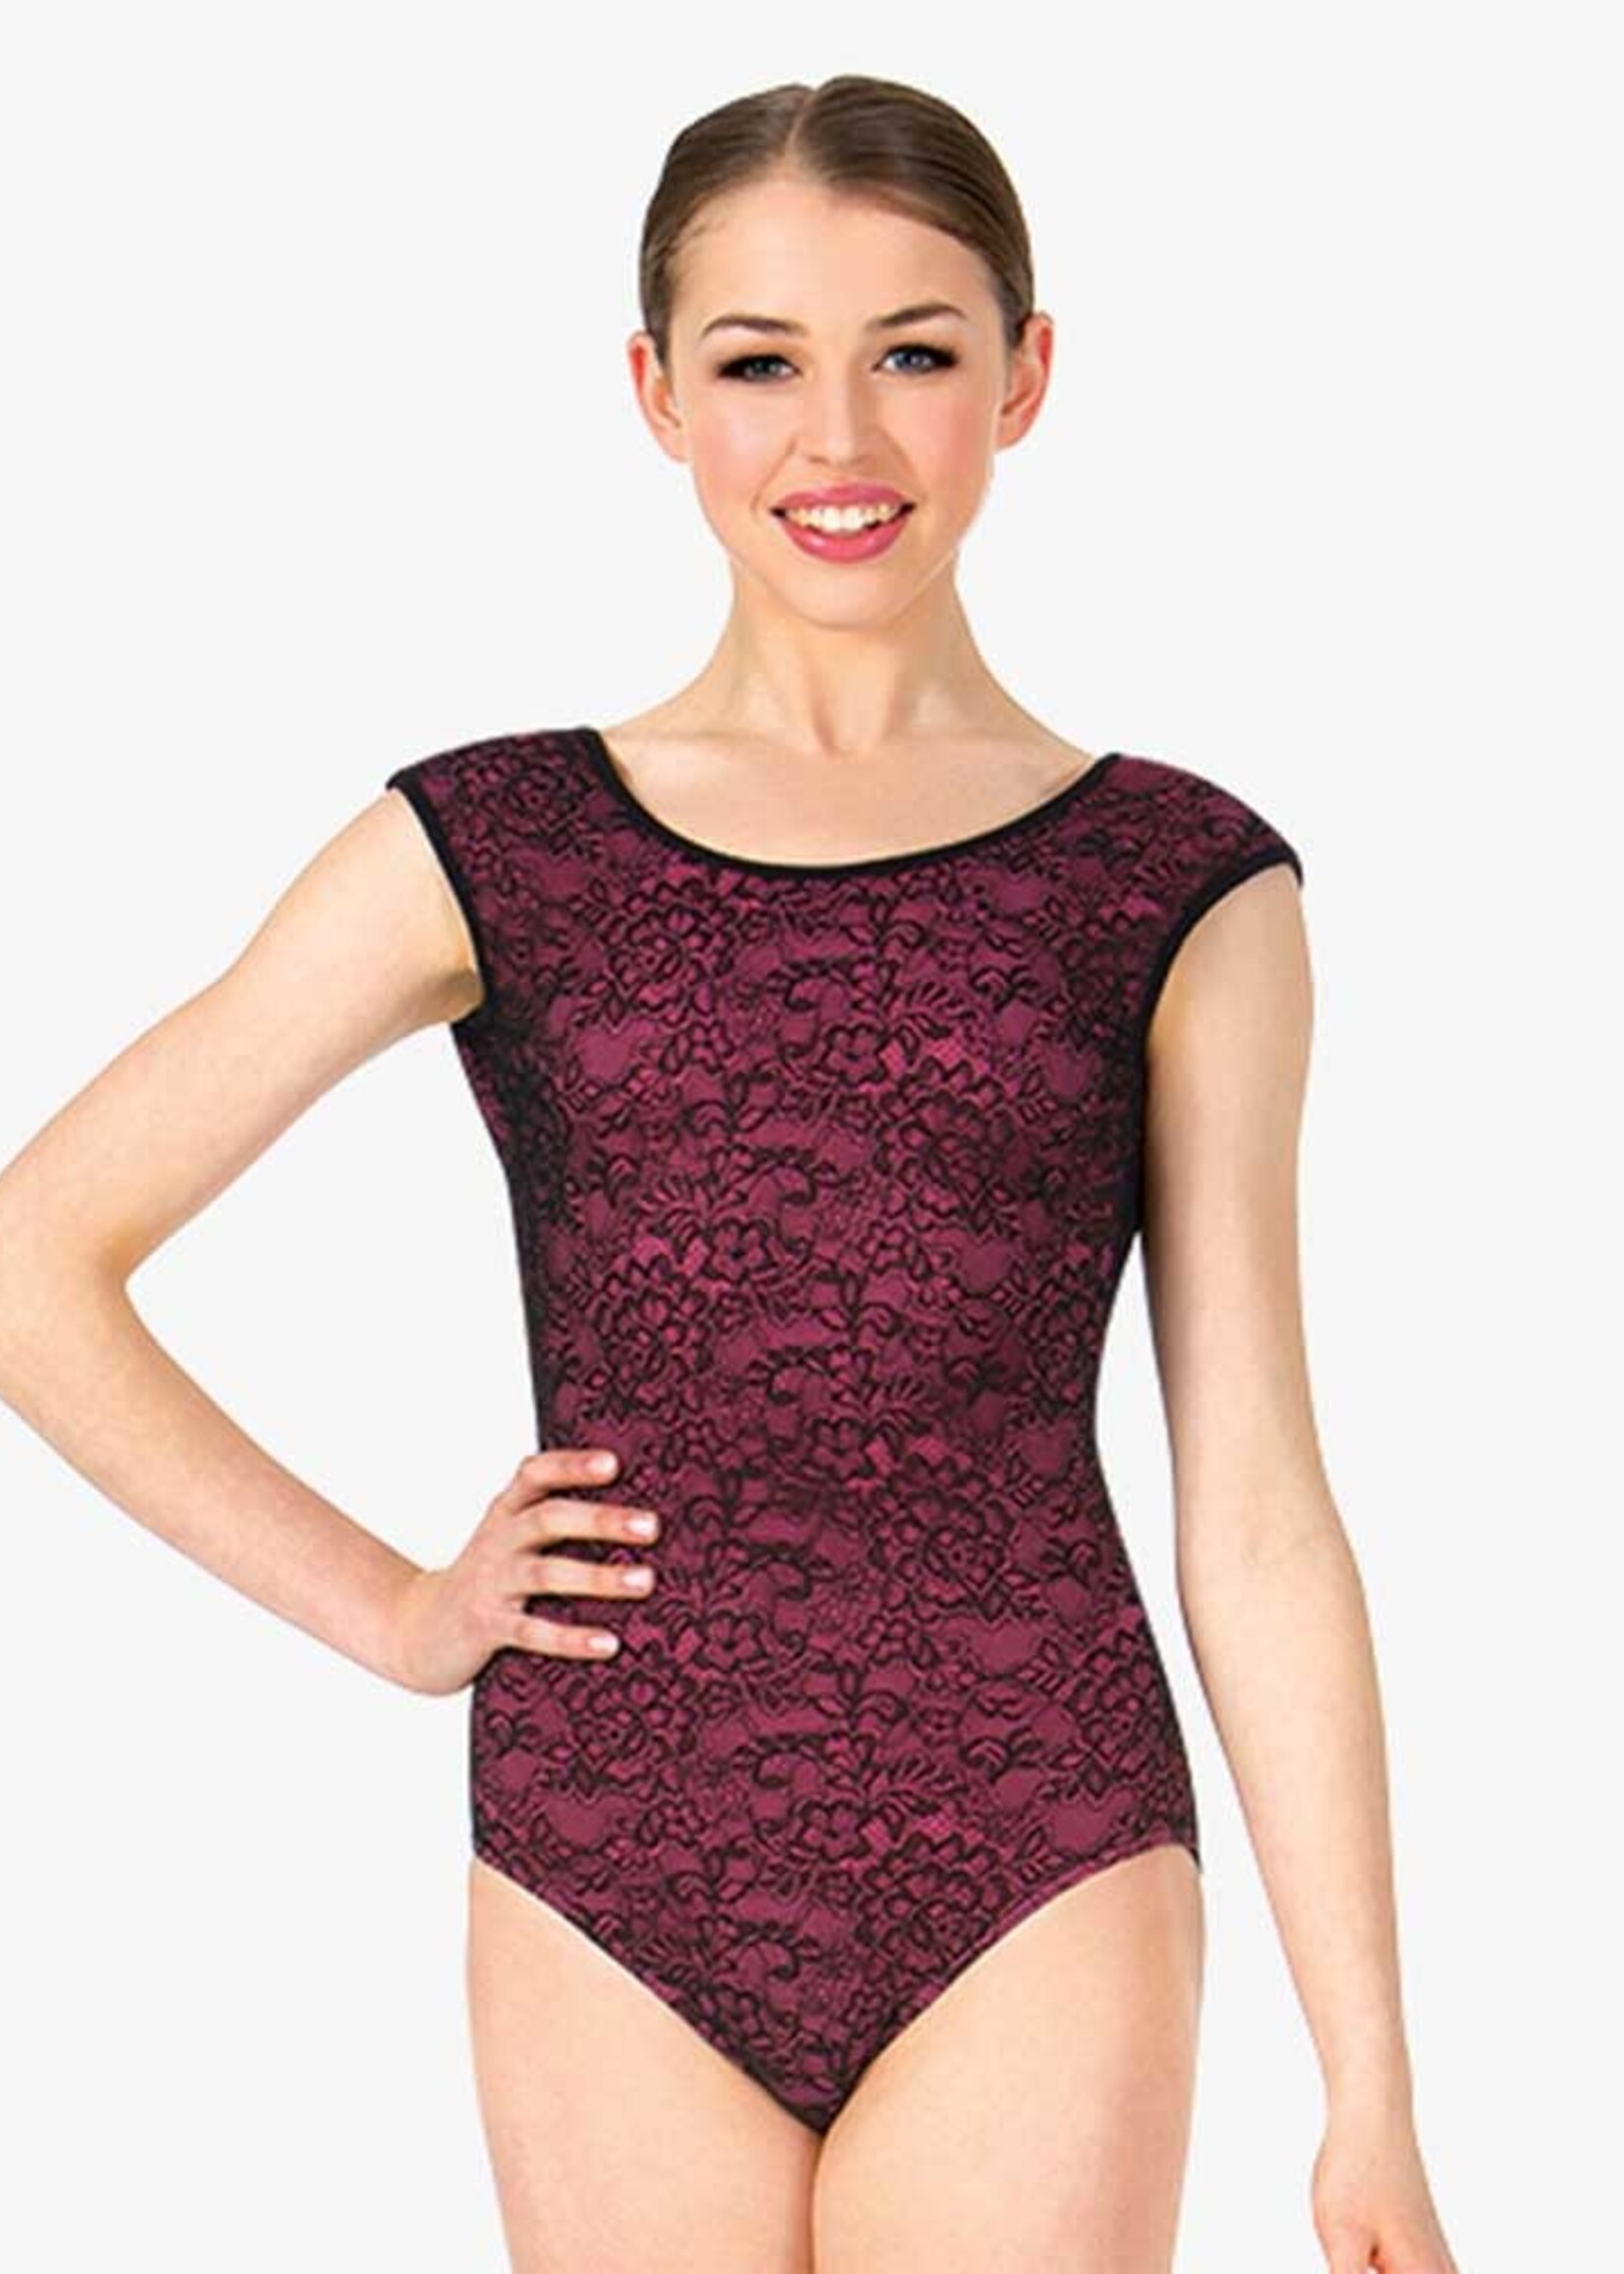 SoDanća RDE-1624 Adult Lace Leotard With Low Open Back